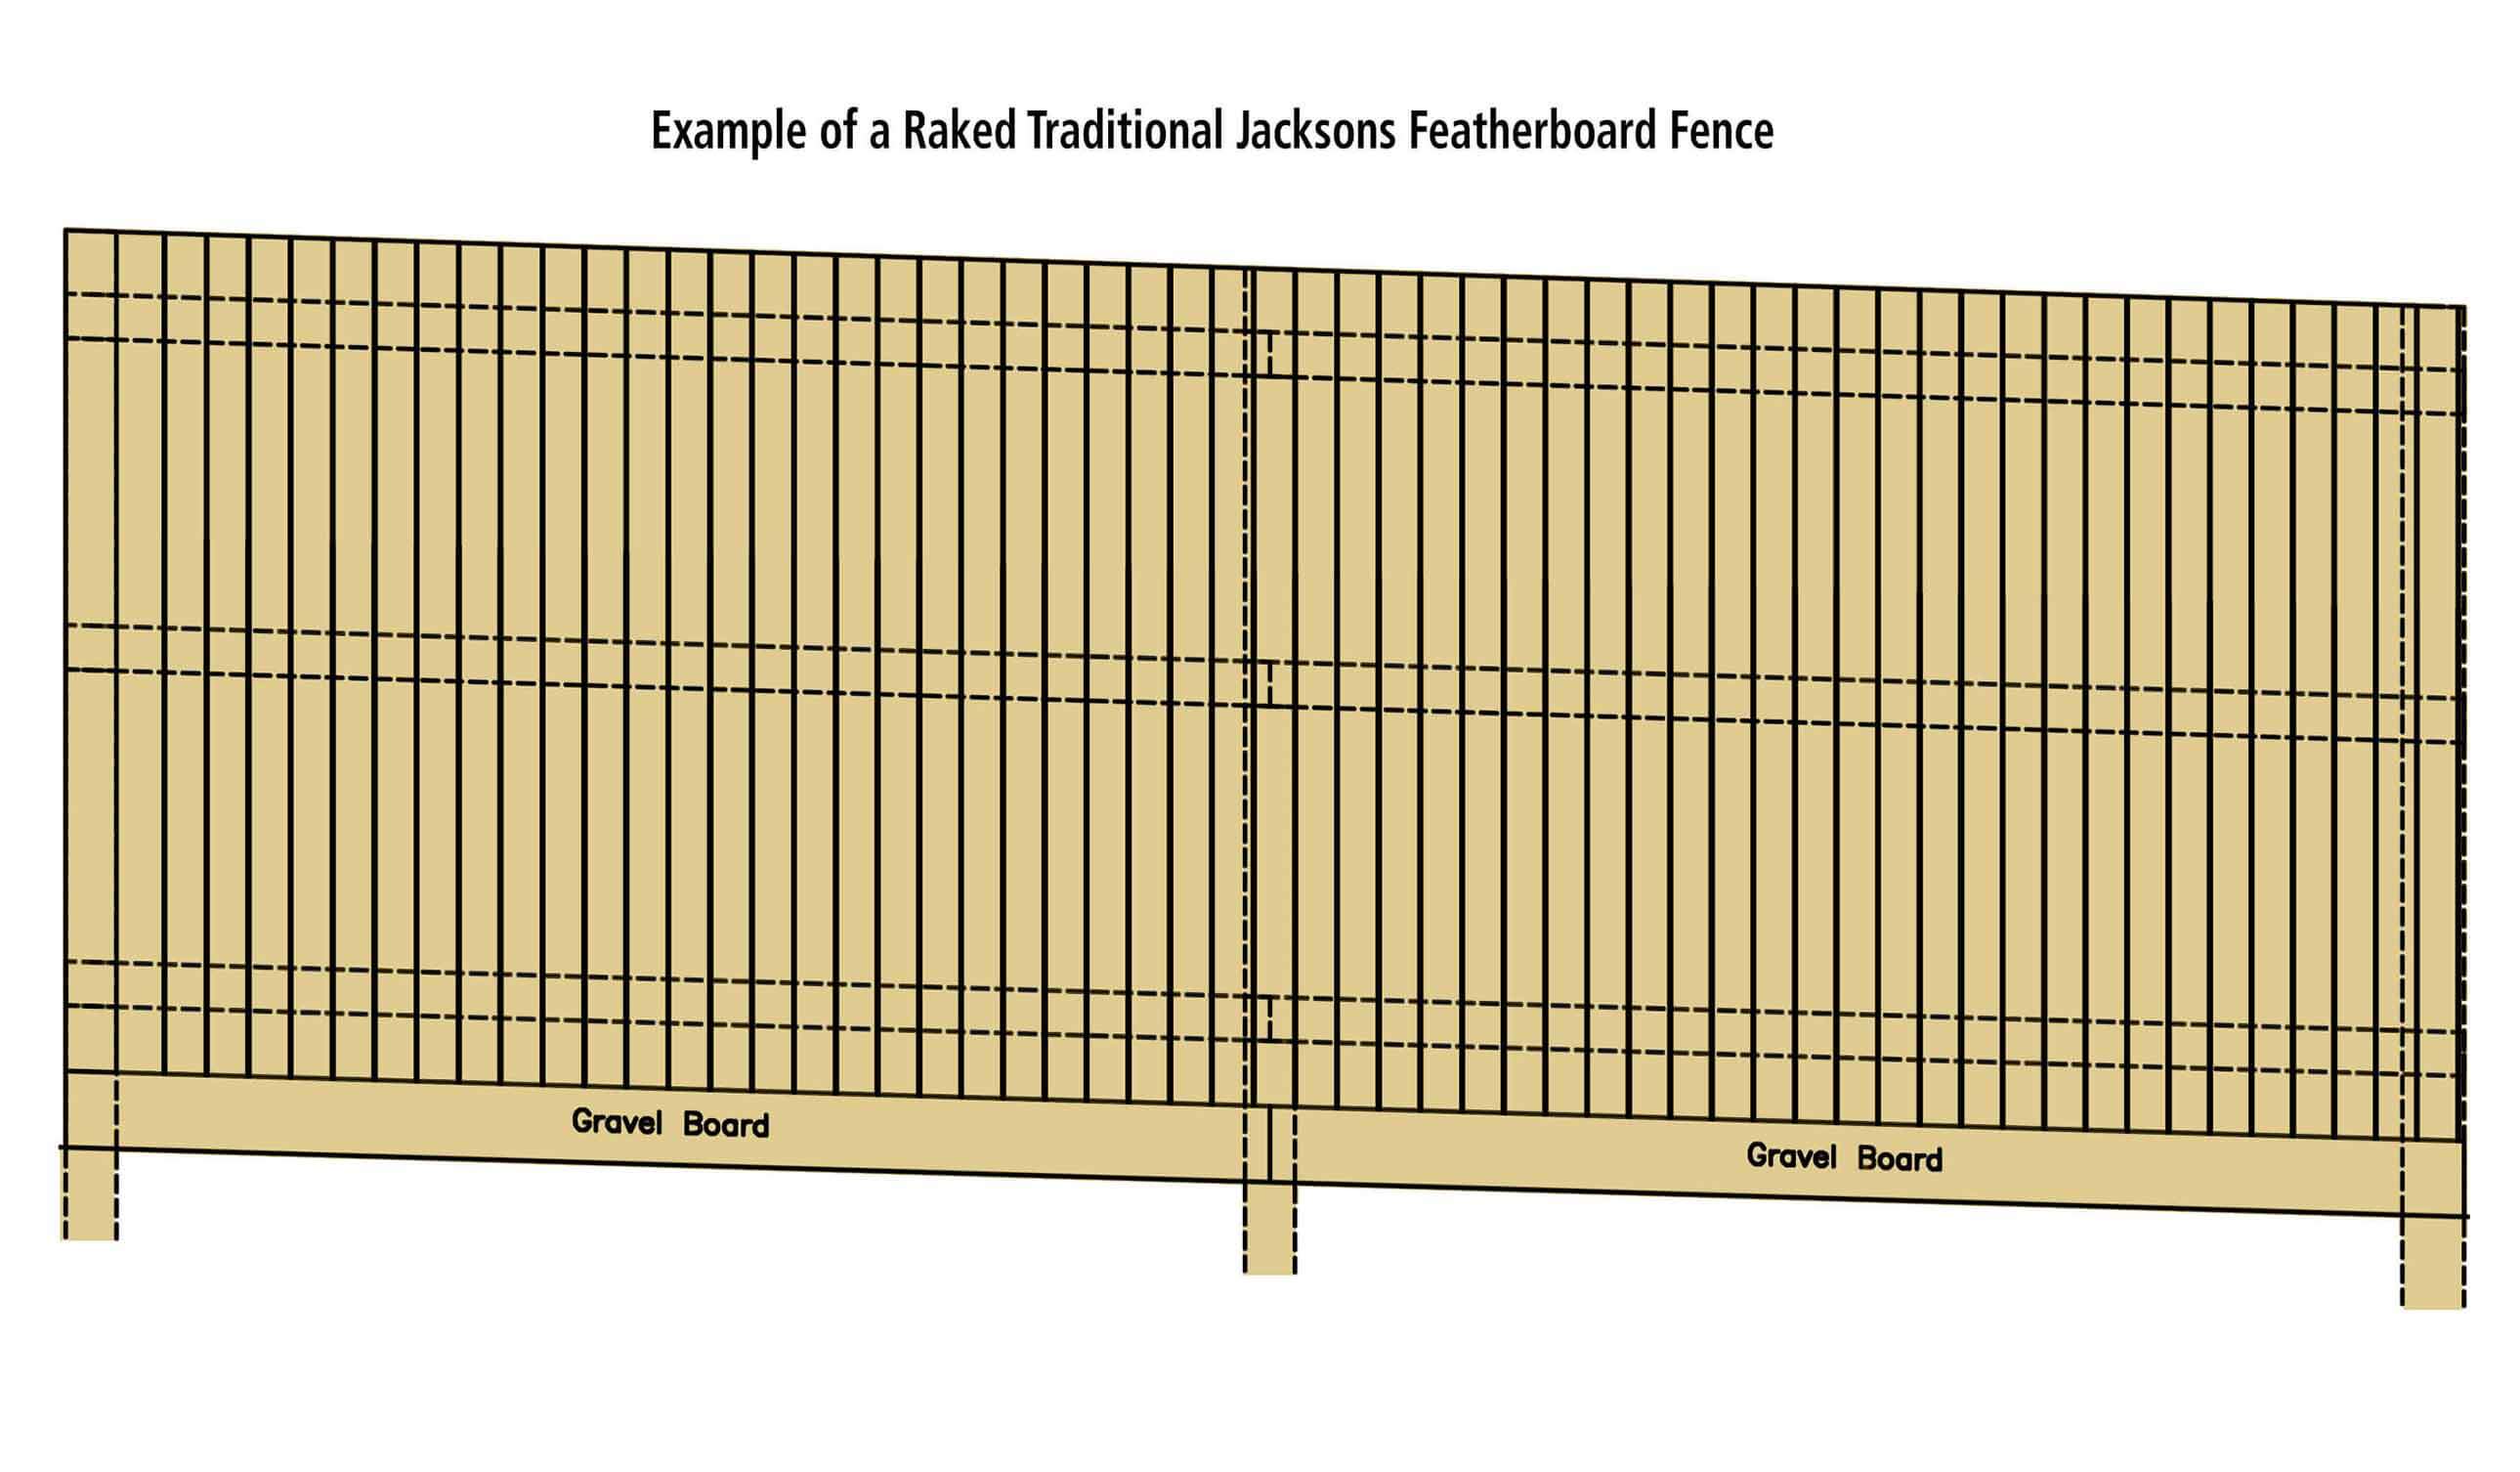 Raked Featherboard fence colour